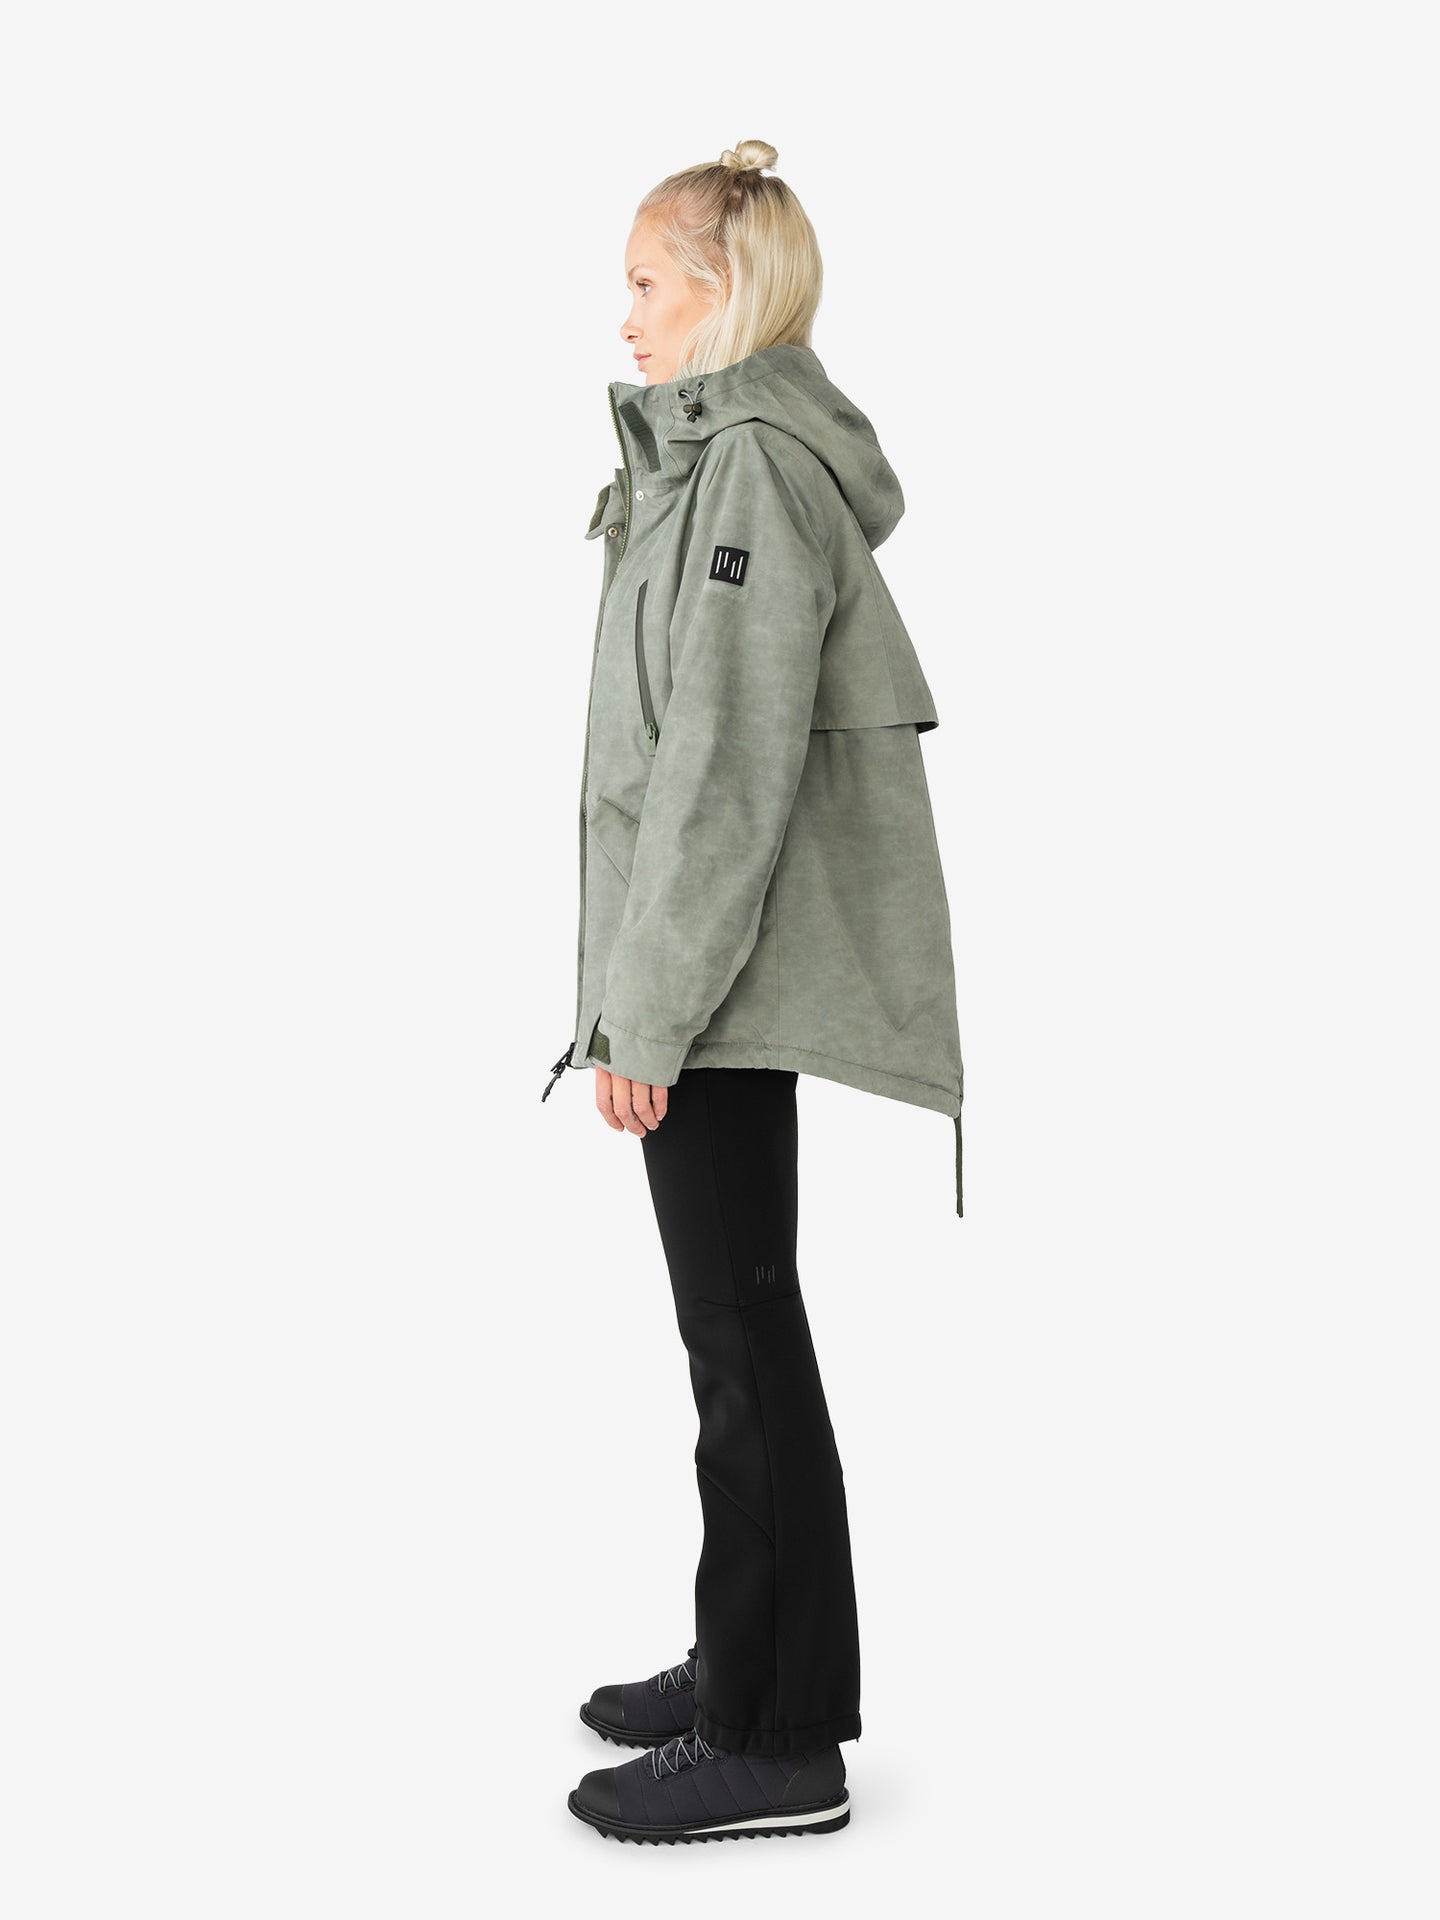 HOLDEN - Women's Snow Outerwear - The New Look of Snowsport Luxury ...